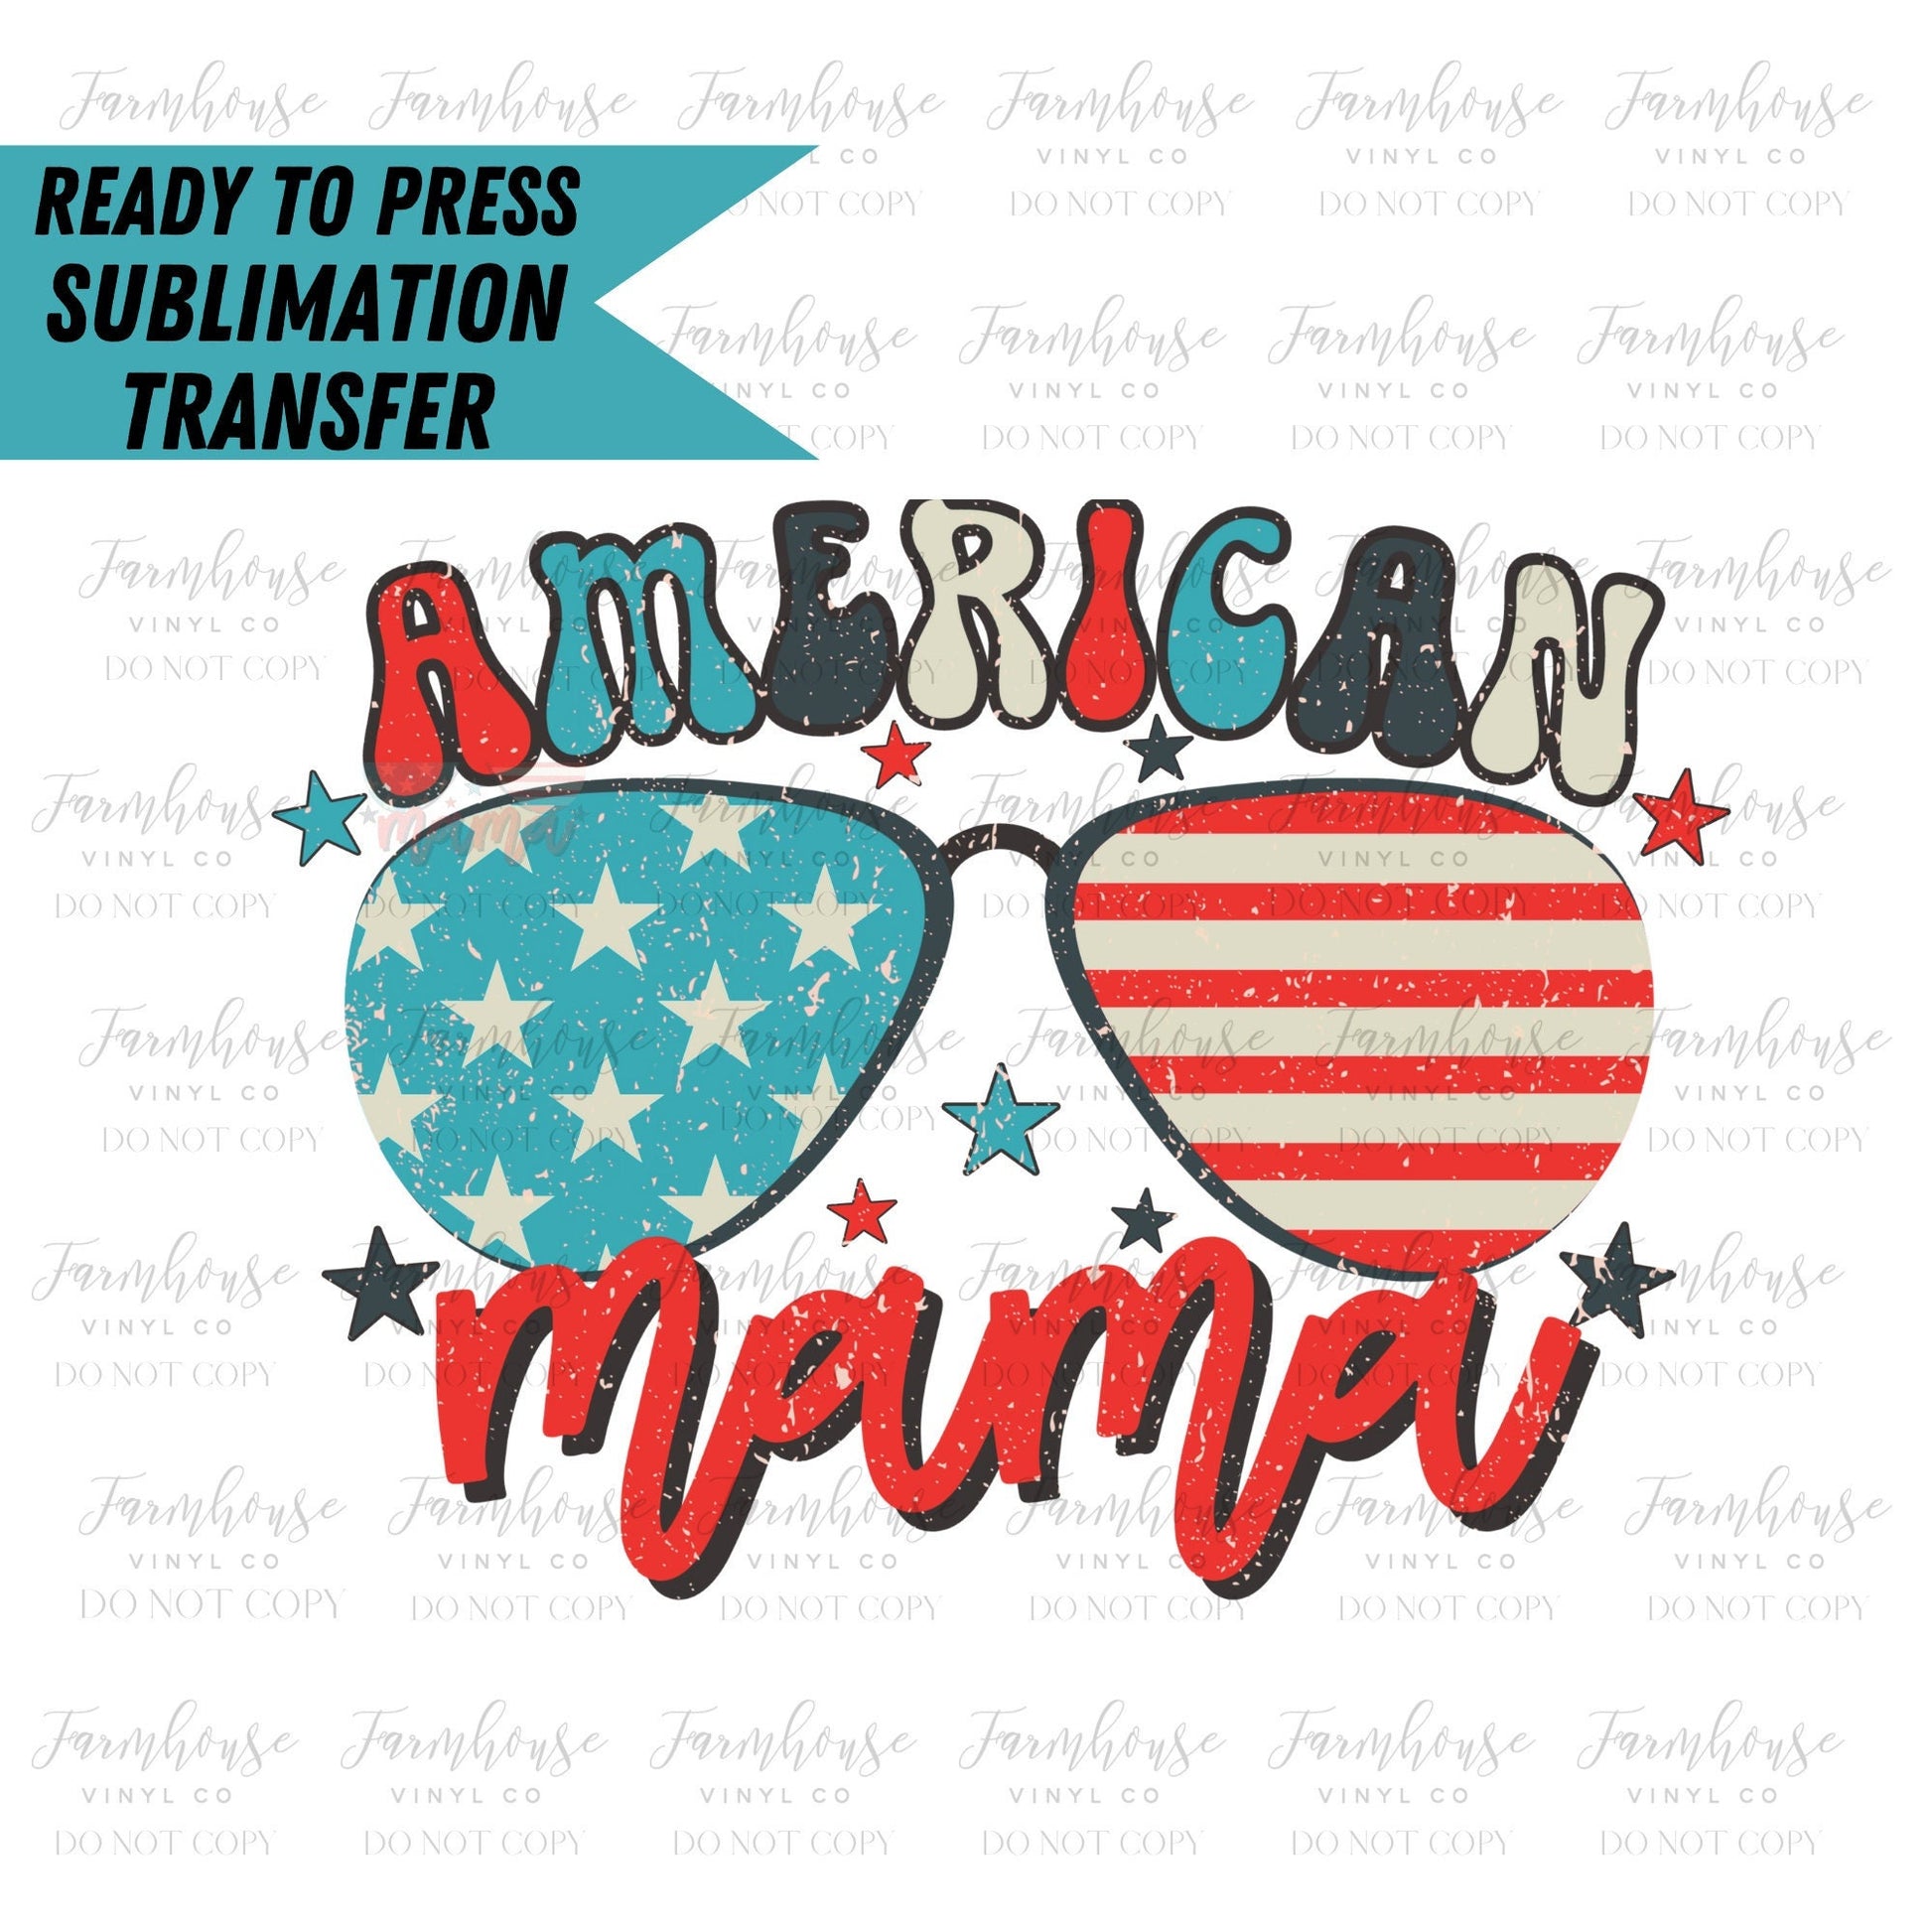 Retro 4th of July American Boy, Ready to Press Sublimation Transfer, Sublimation Transfers, Heat Transfer, 4th of July, American Girl Boy - Farmhouse Vinyl Co